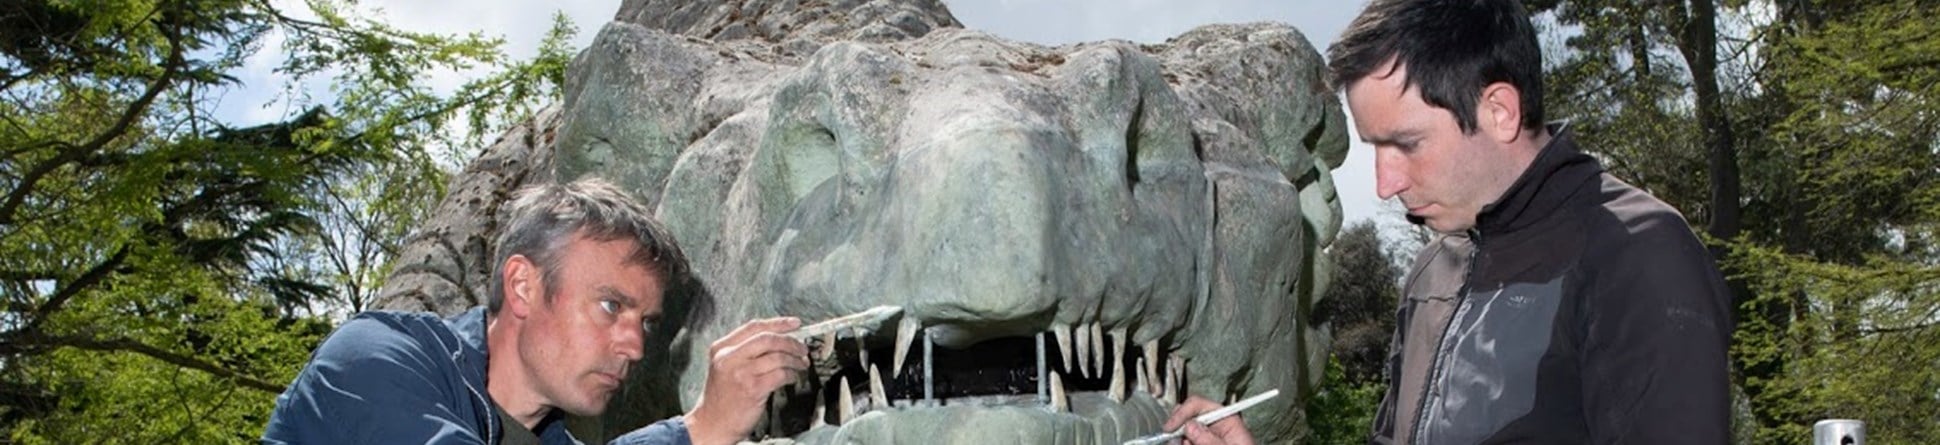 Photograph of the dinosaur sculpture's face as two skilled craftsmen intricately paint it's replacement jaw green.